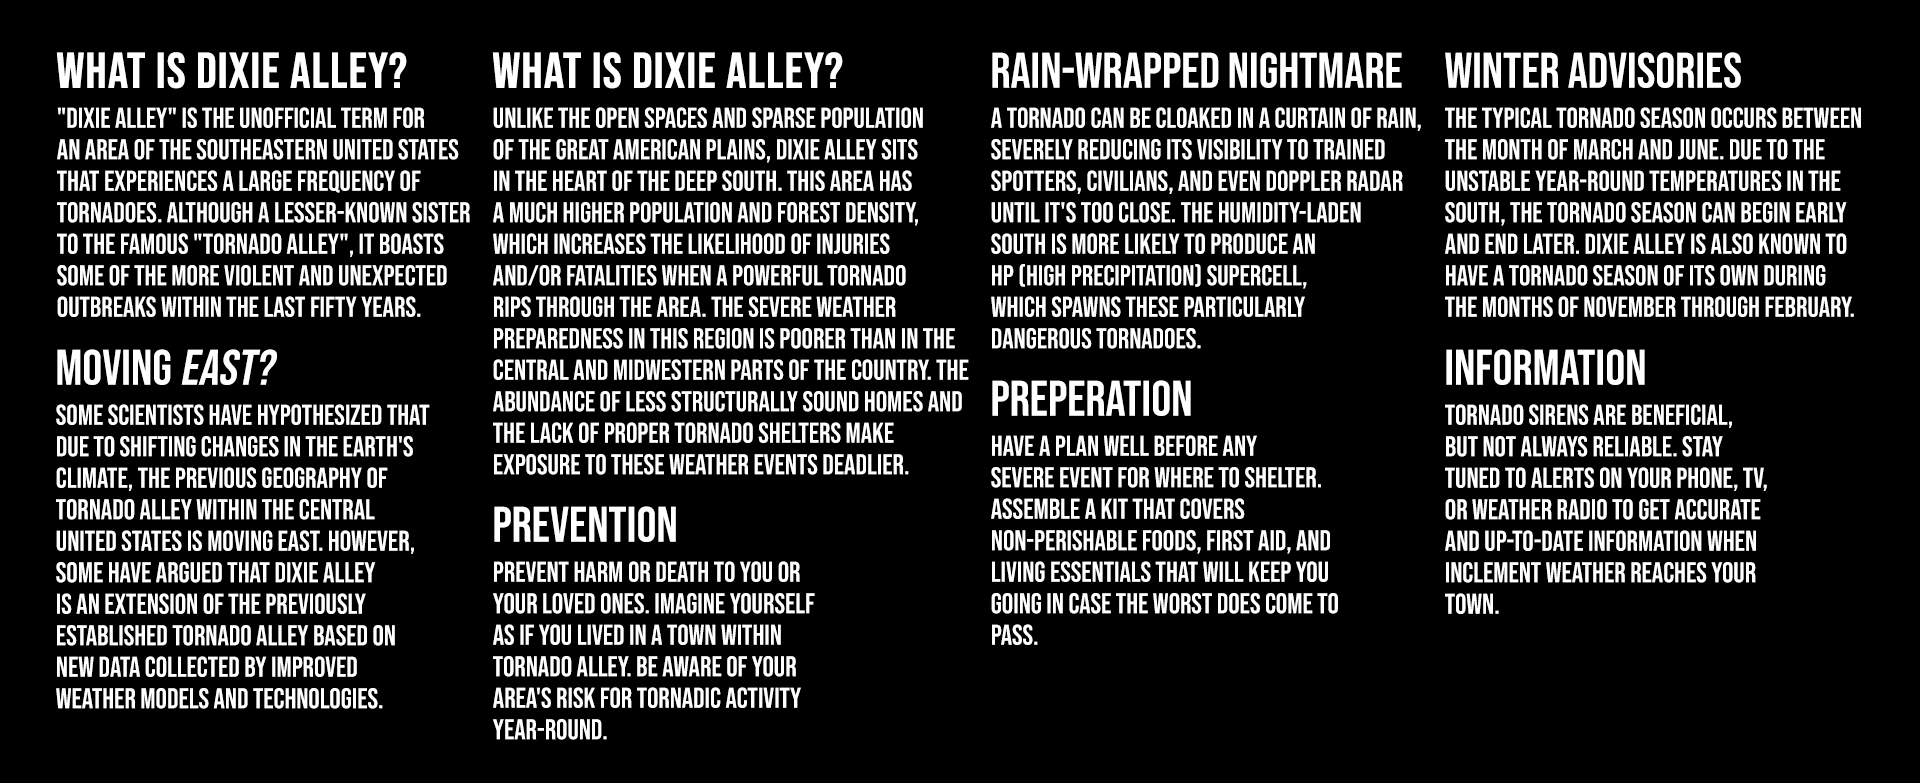 Dixie Alley Infographic_info.png